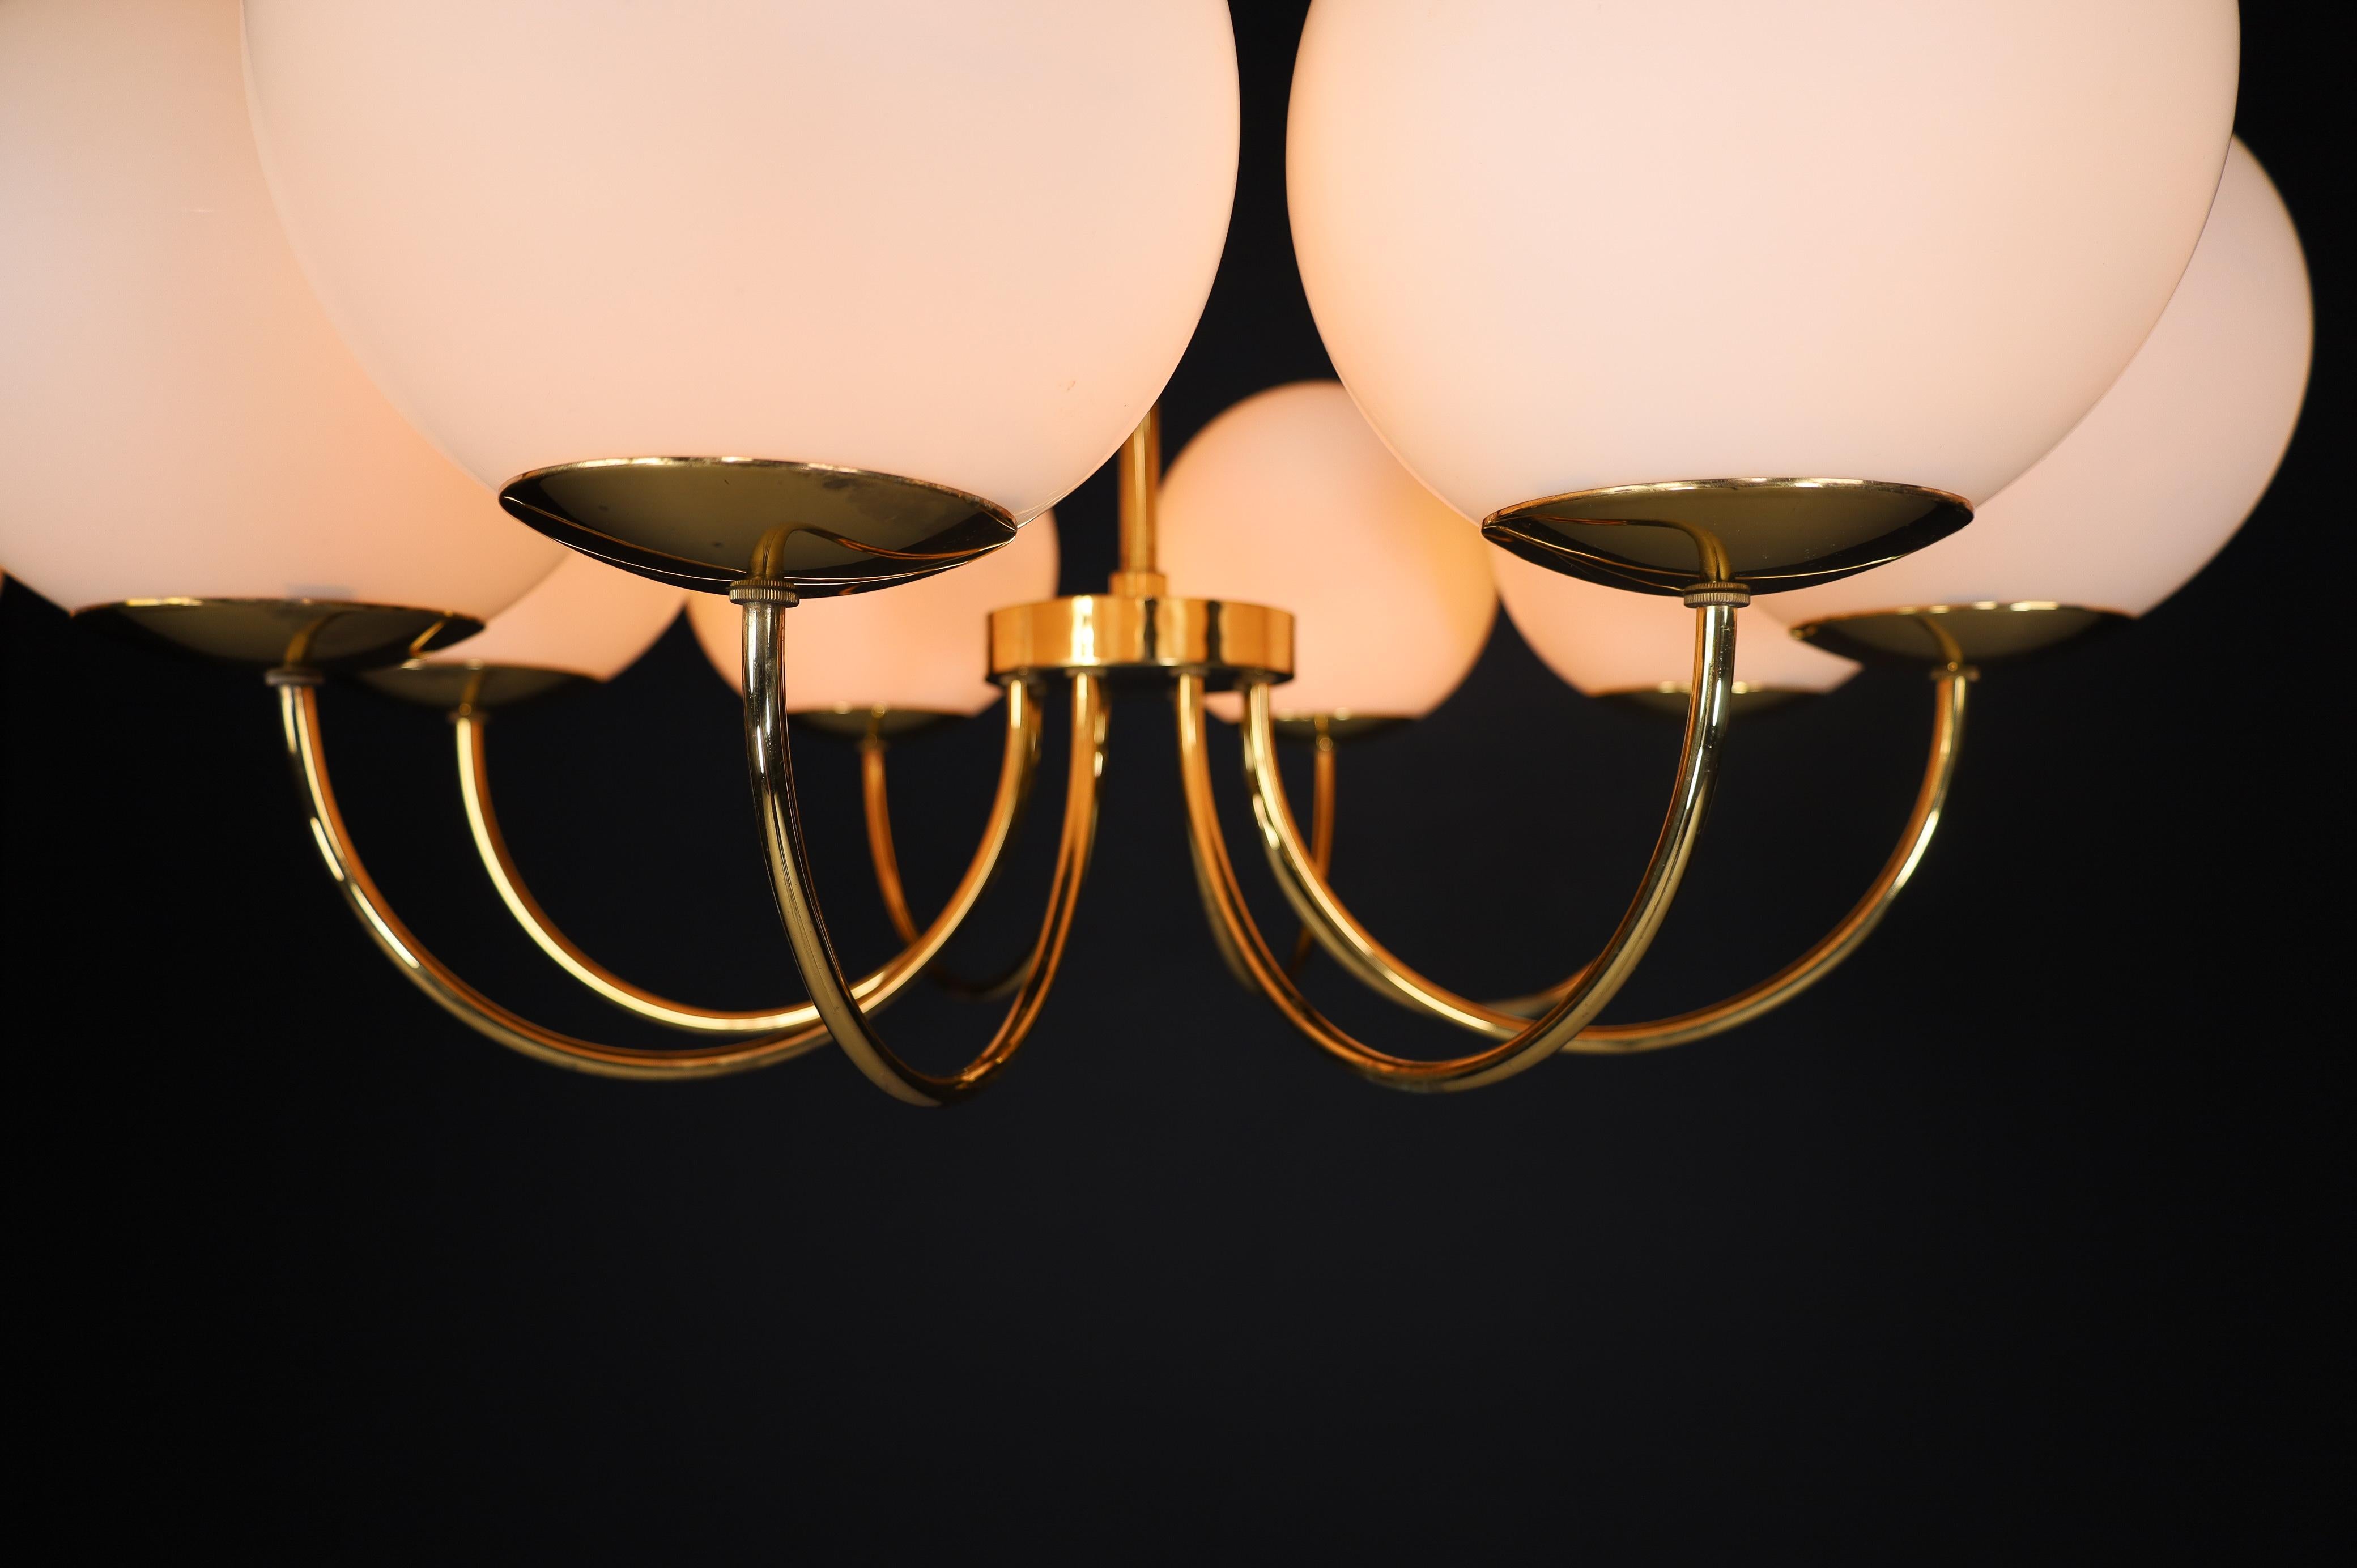 1 of 3 Elegant Chandeliers with Brass Fixture and Opaline Glass Globes, 1960s For Sale 2